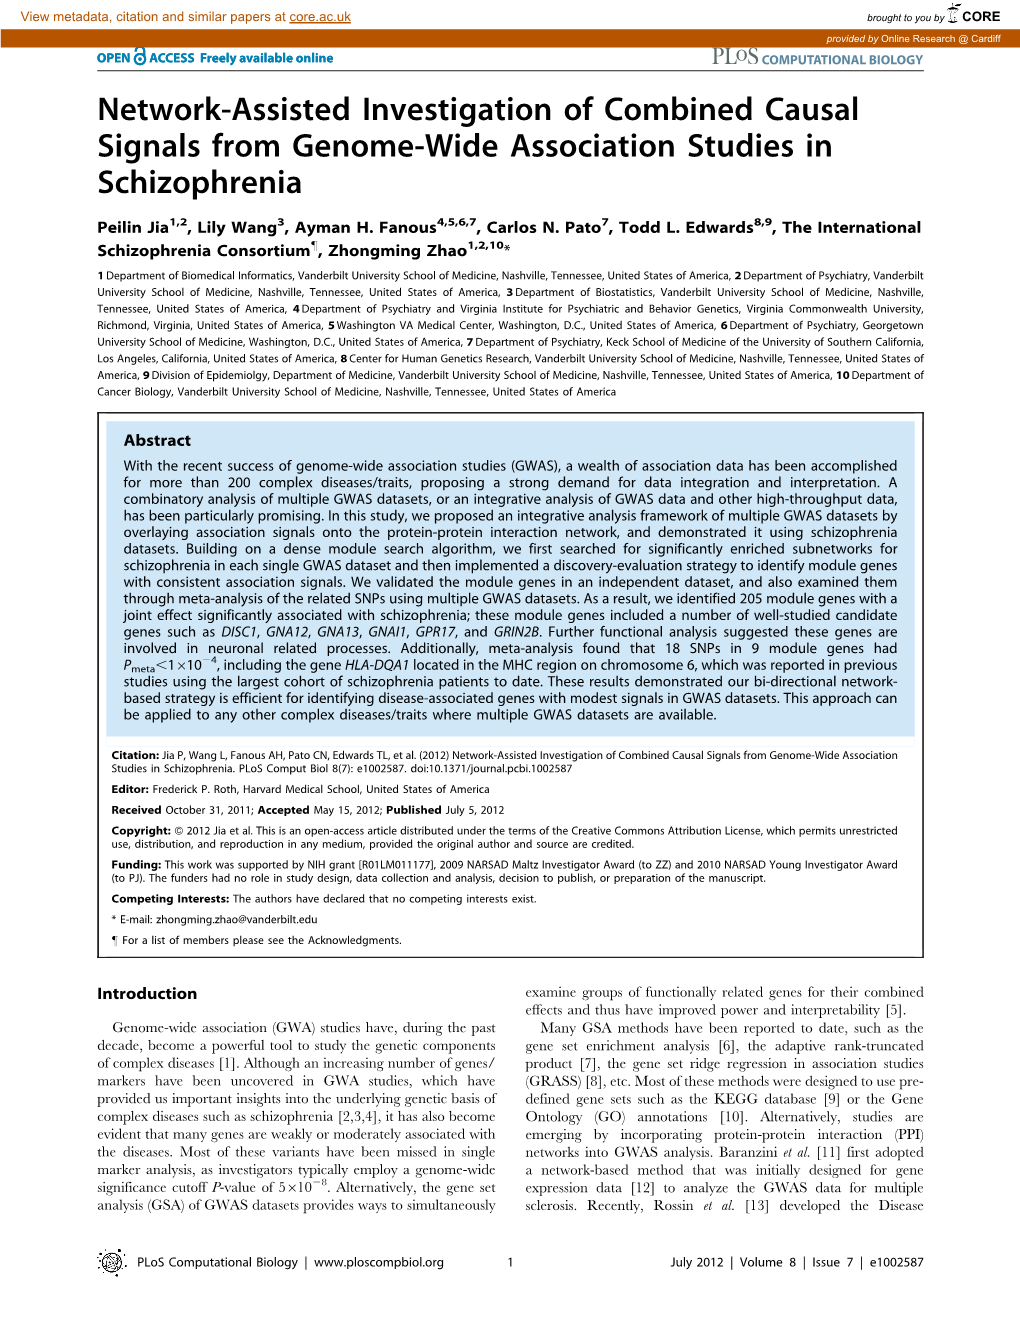 Downloaded Case Control Study of Schizophrenia (ICCSS) Sample [27]